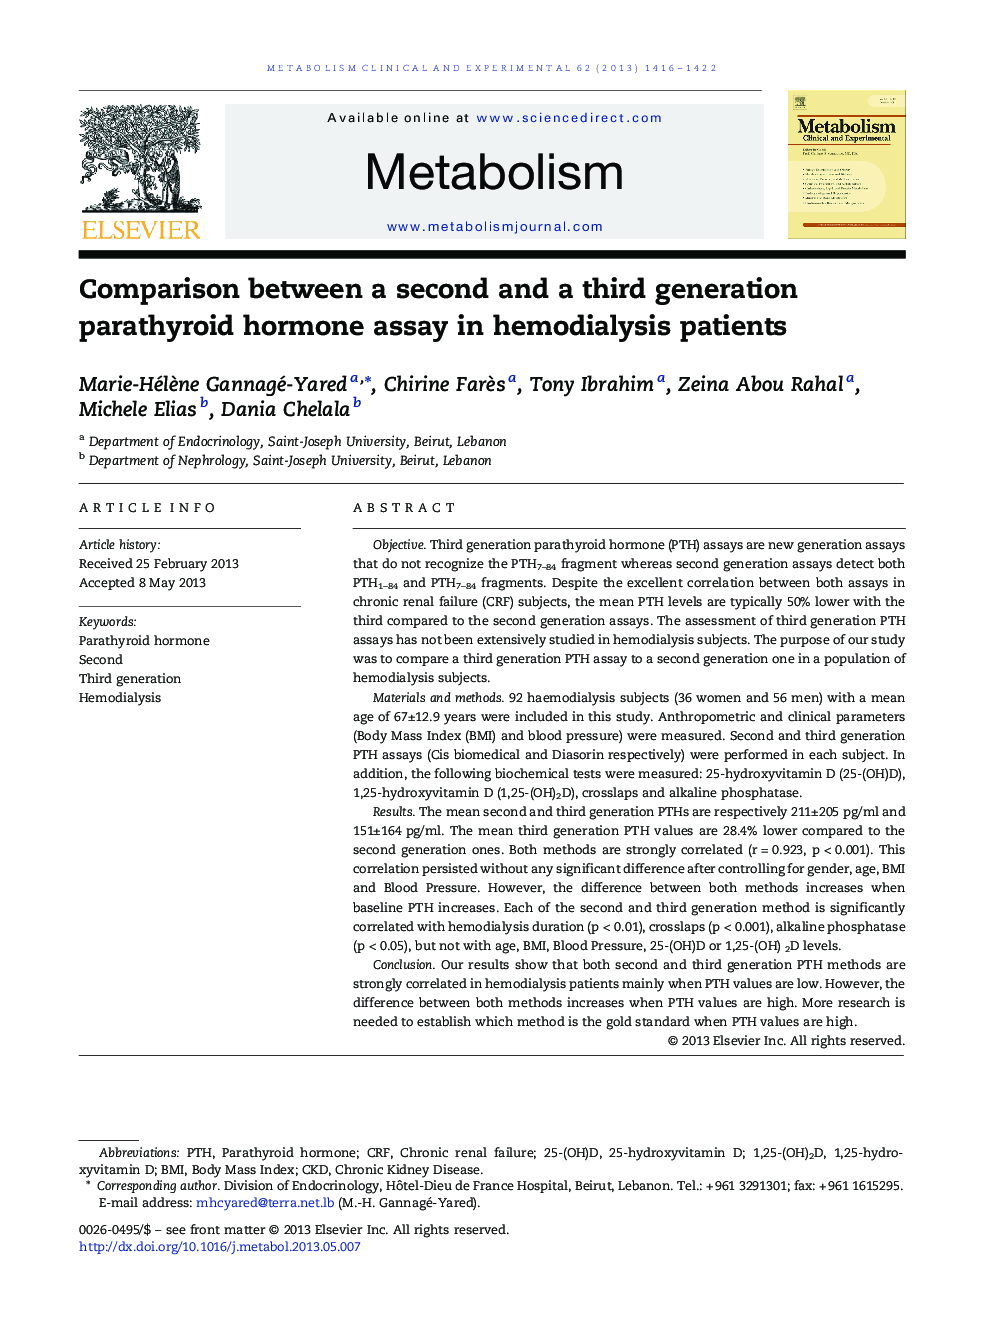 Comparison between a second and a third generation parathyroid hormone assay in hemodialysis patients